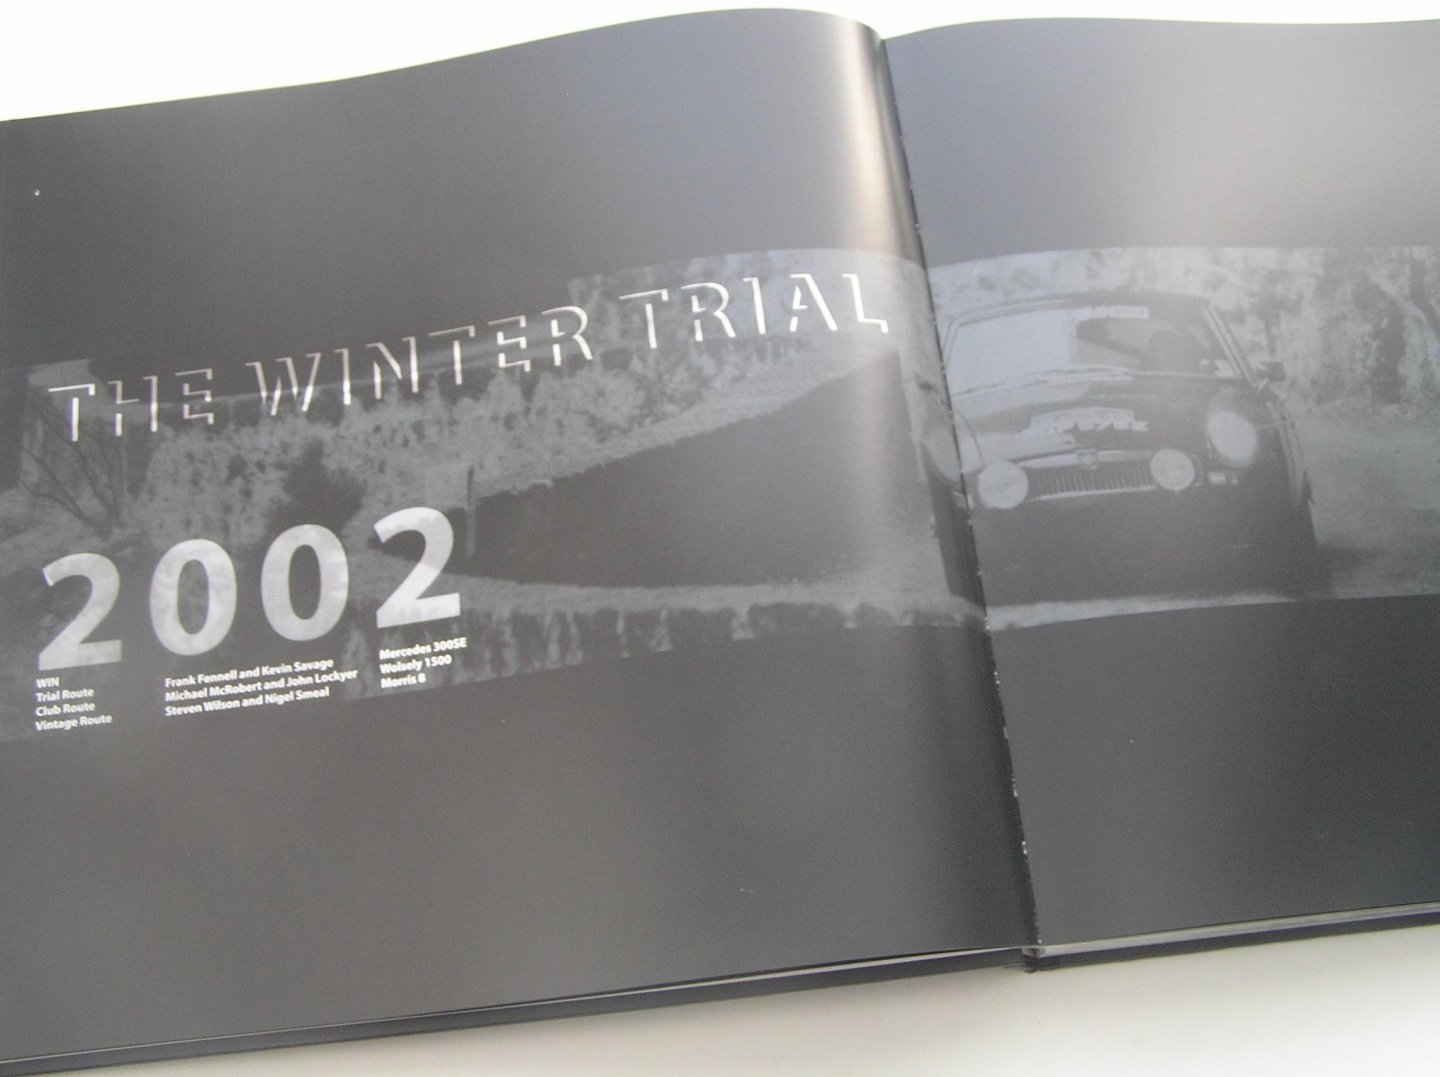 Snel Joost e.a - 10 years of Passion for Classics The anniversary book of 10 years The Winter Trial